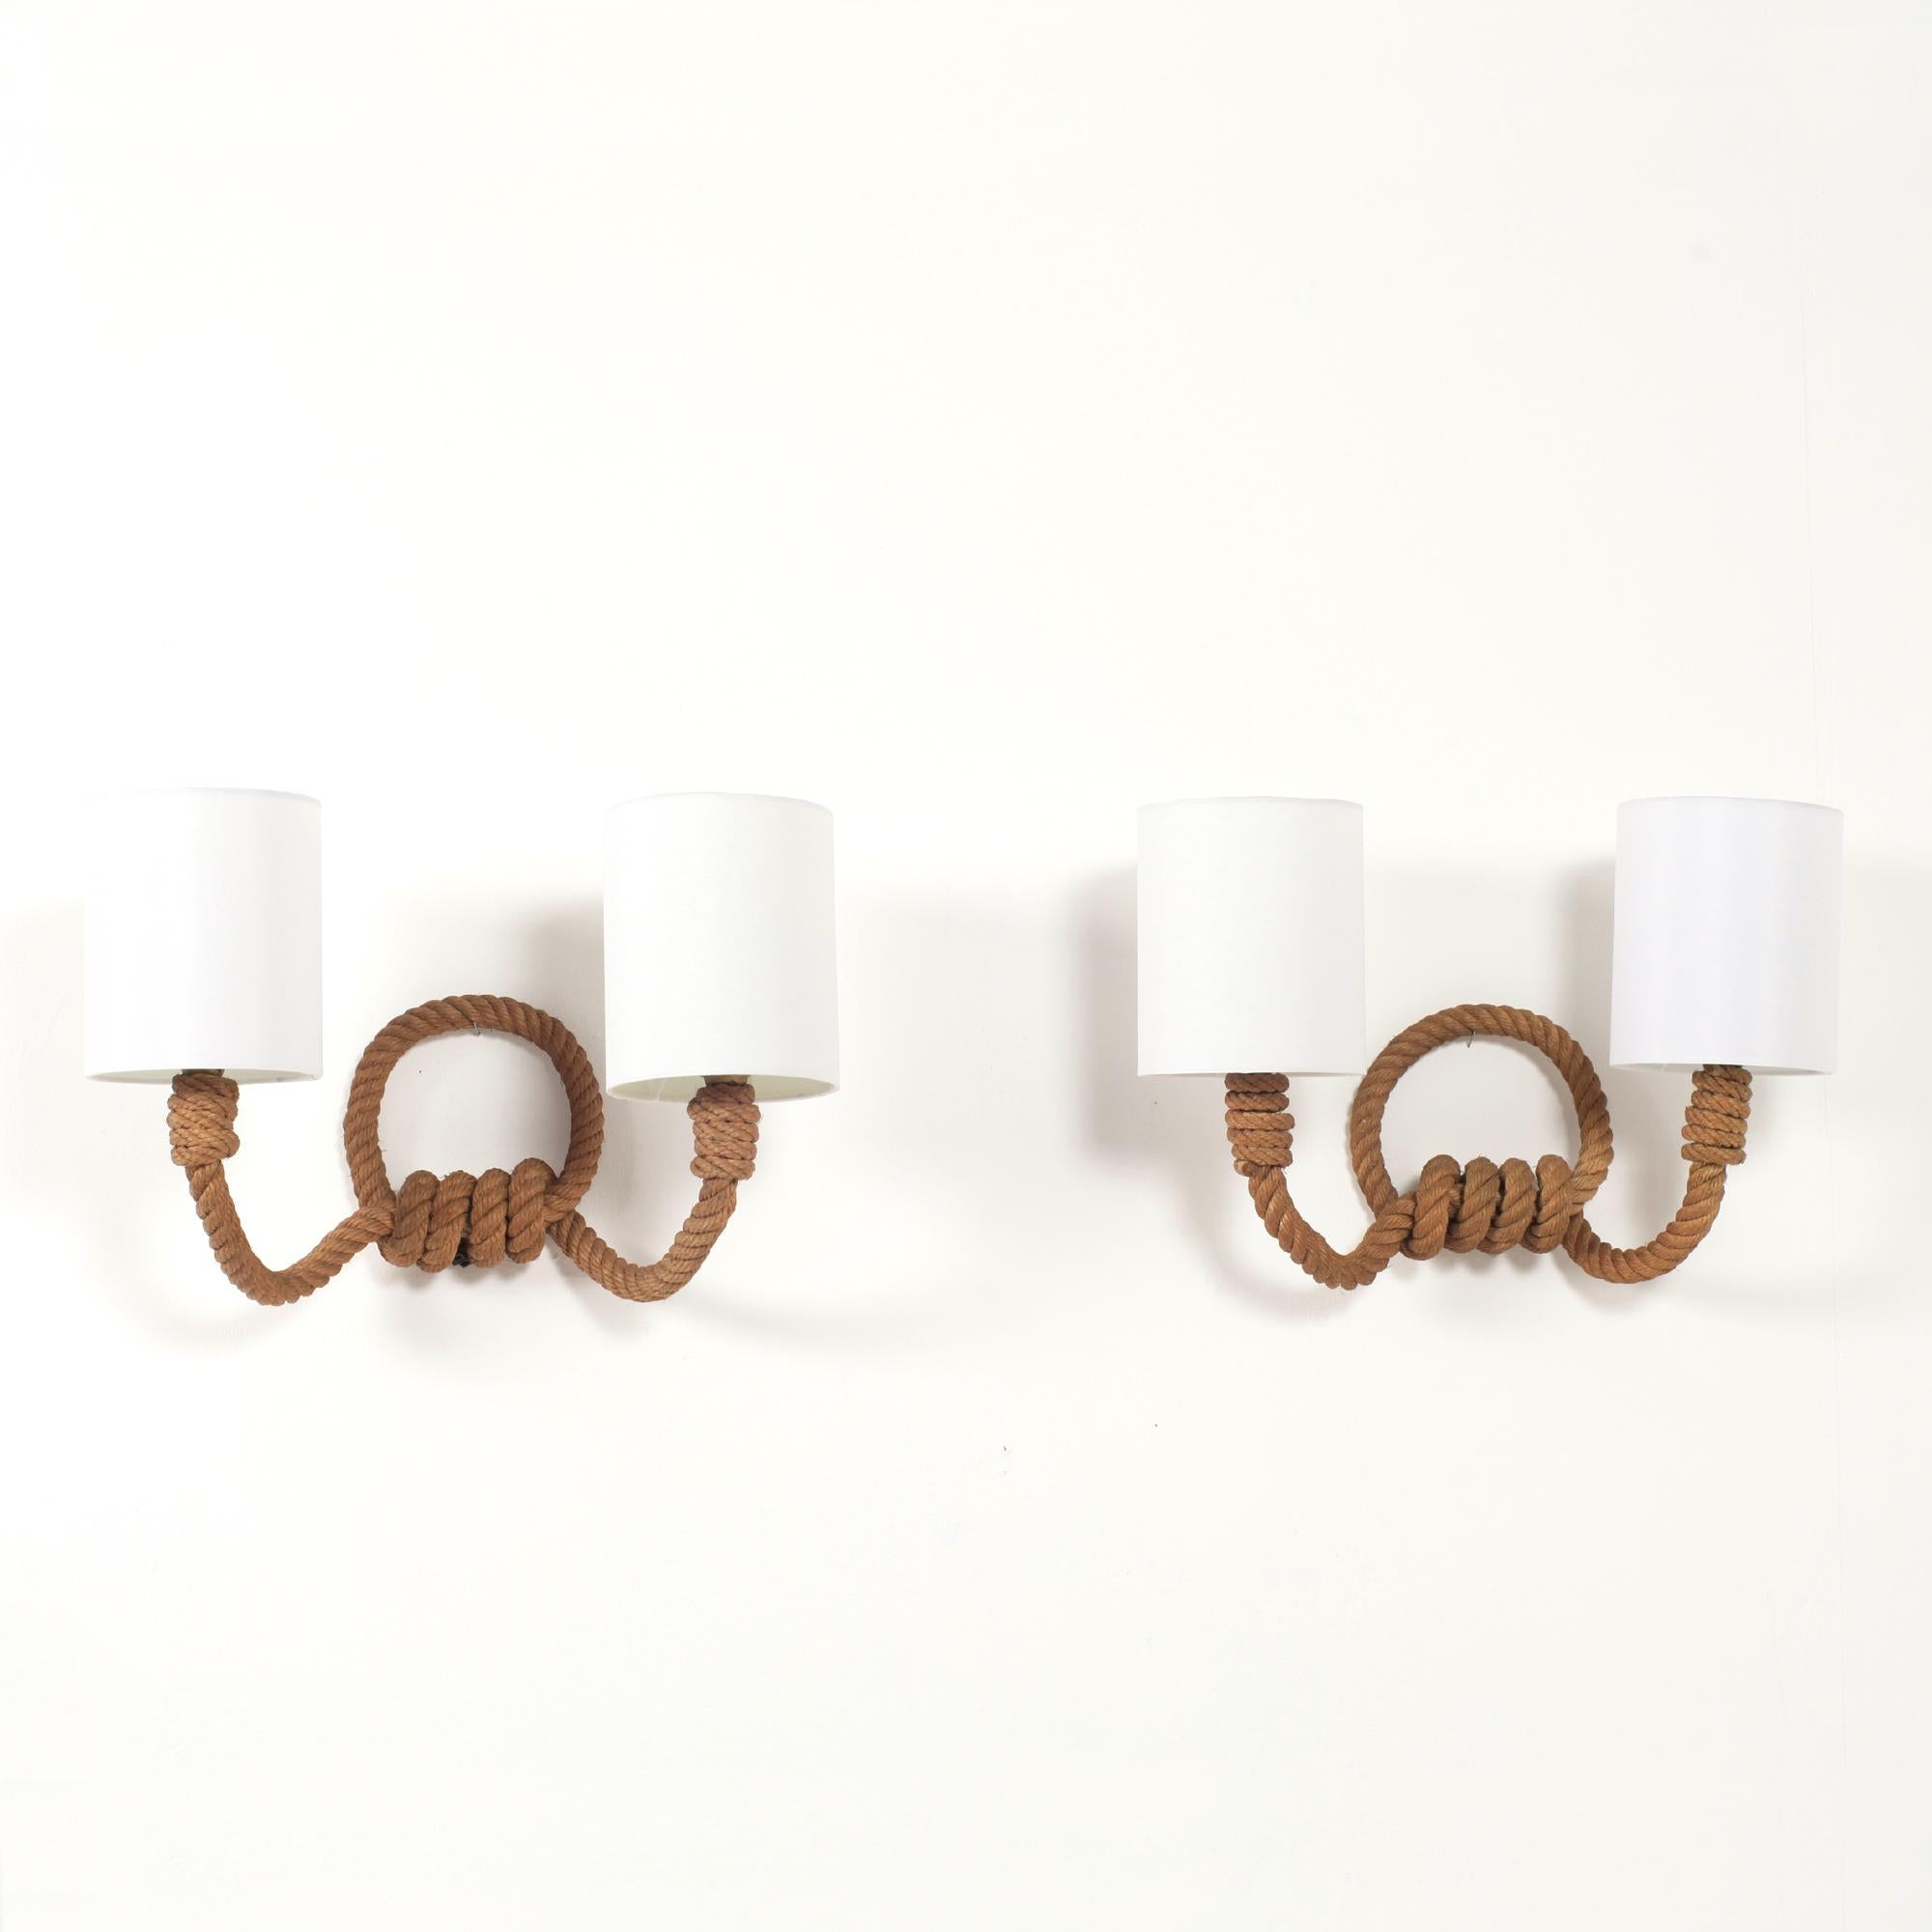 Mid-Century Modern Audoux-Minet Pair of Two Lights Rope Sconces, France, 1950 For Sale